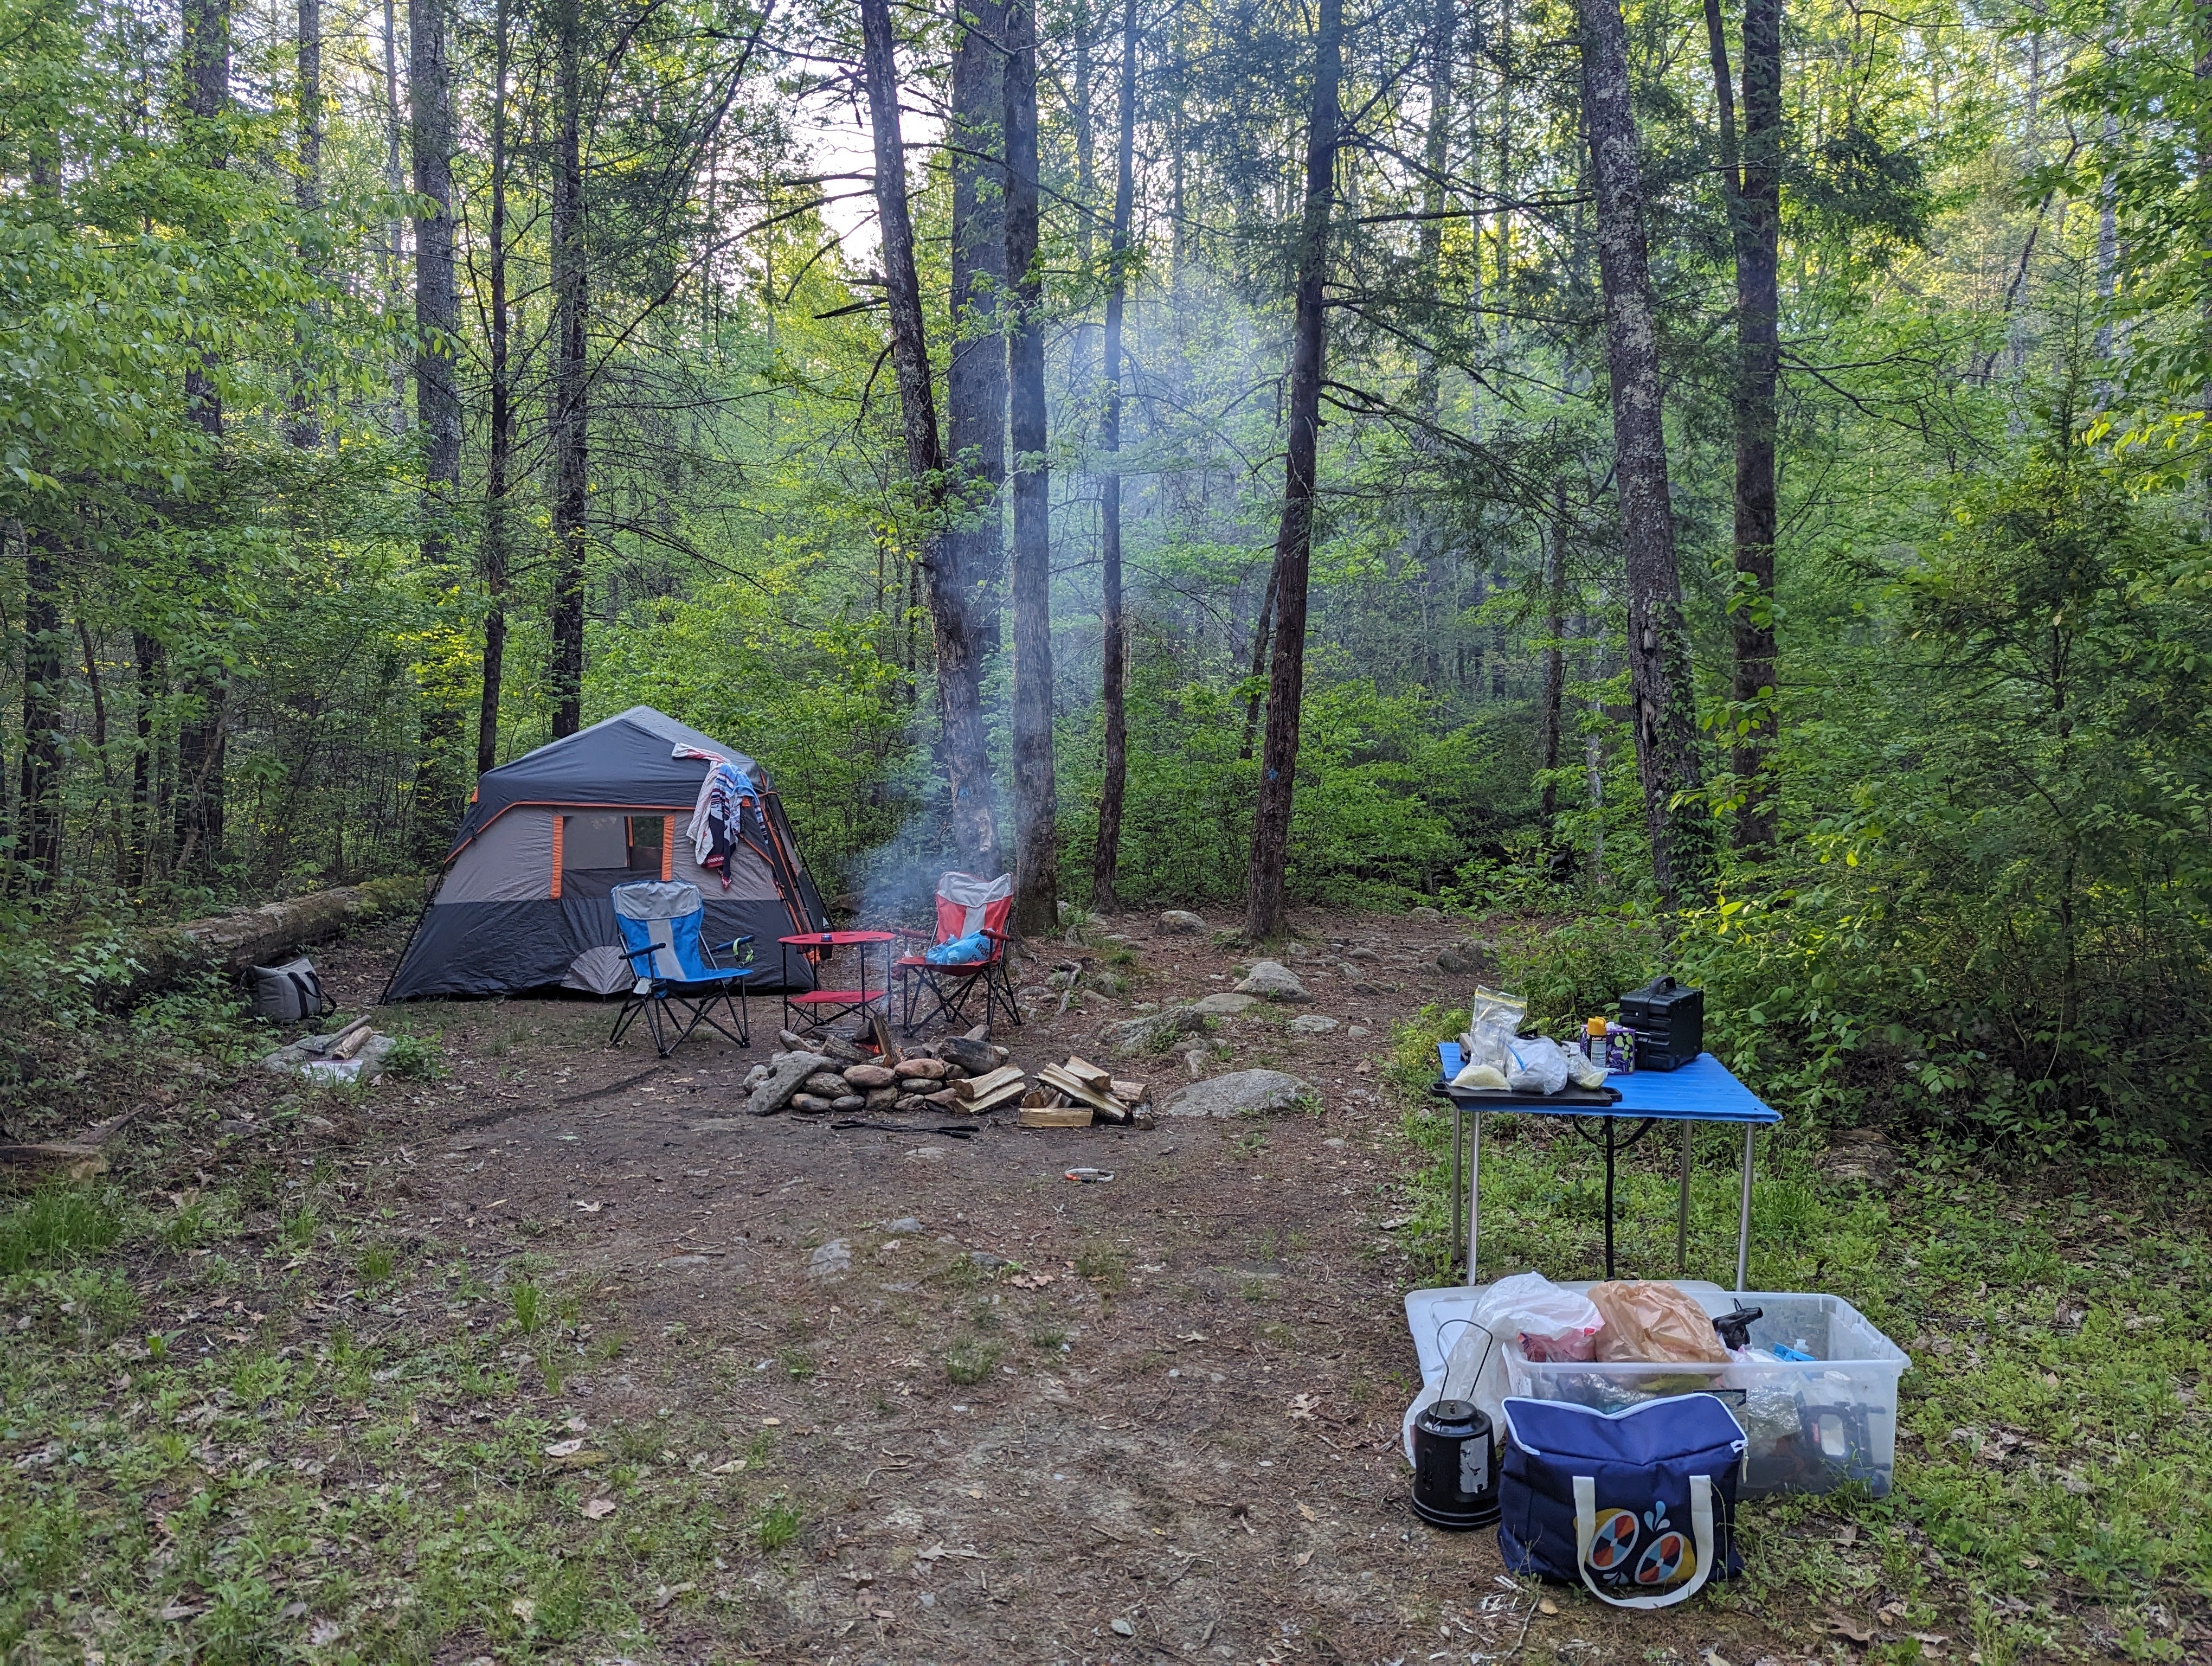 Camper submitted image from Upper Creek, Pisgah National Forest NC - 4